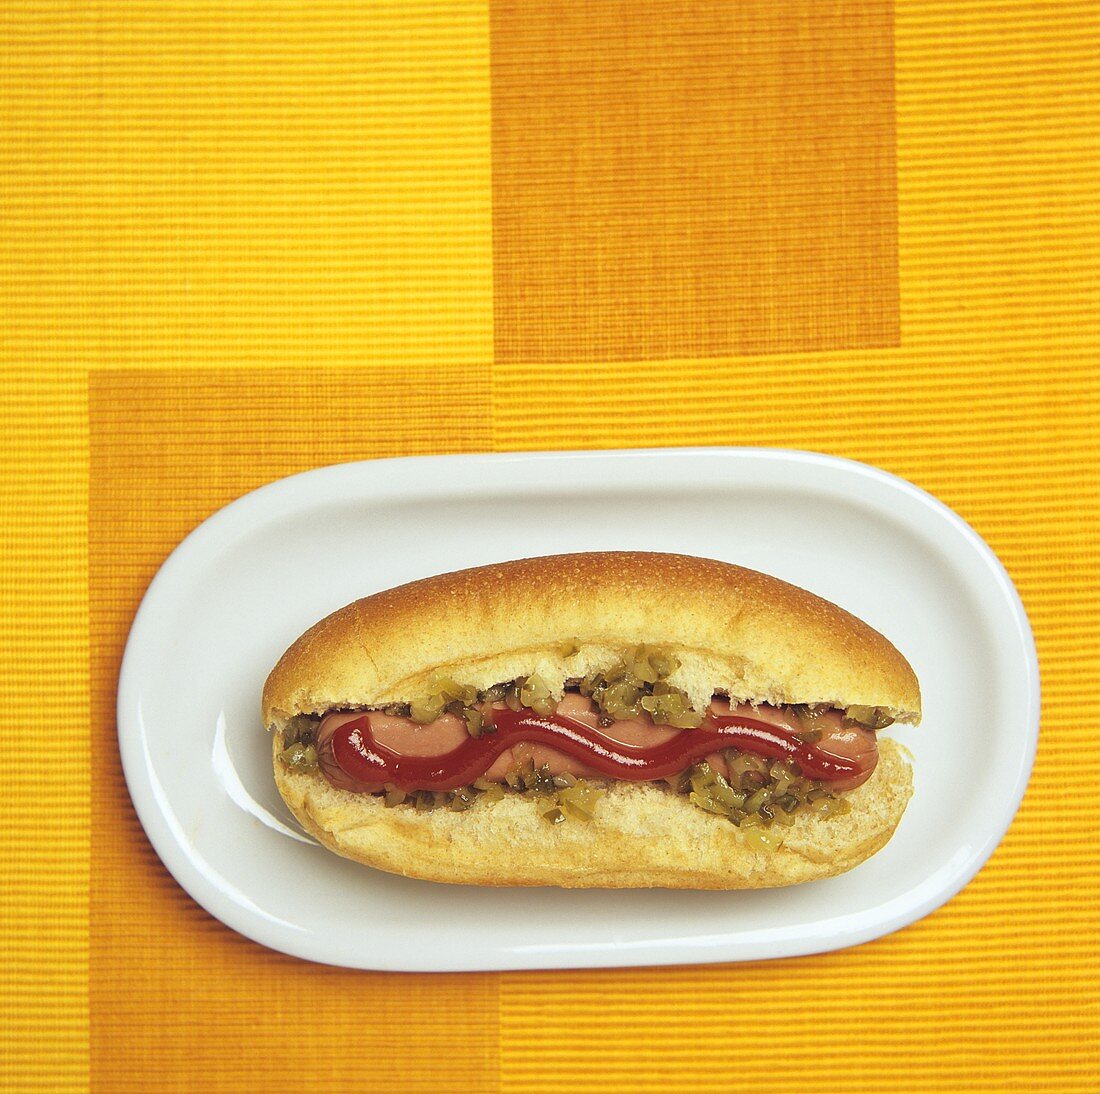 Hot dog with relish and ketchup (overhead view)